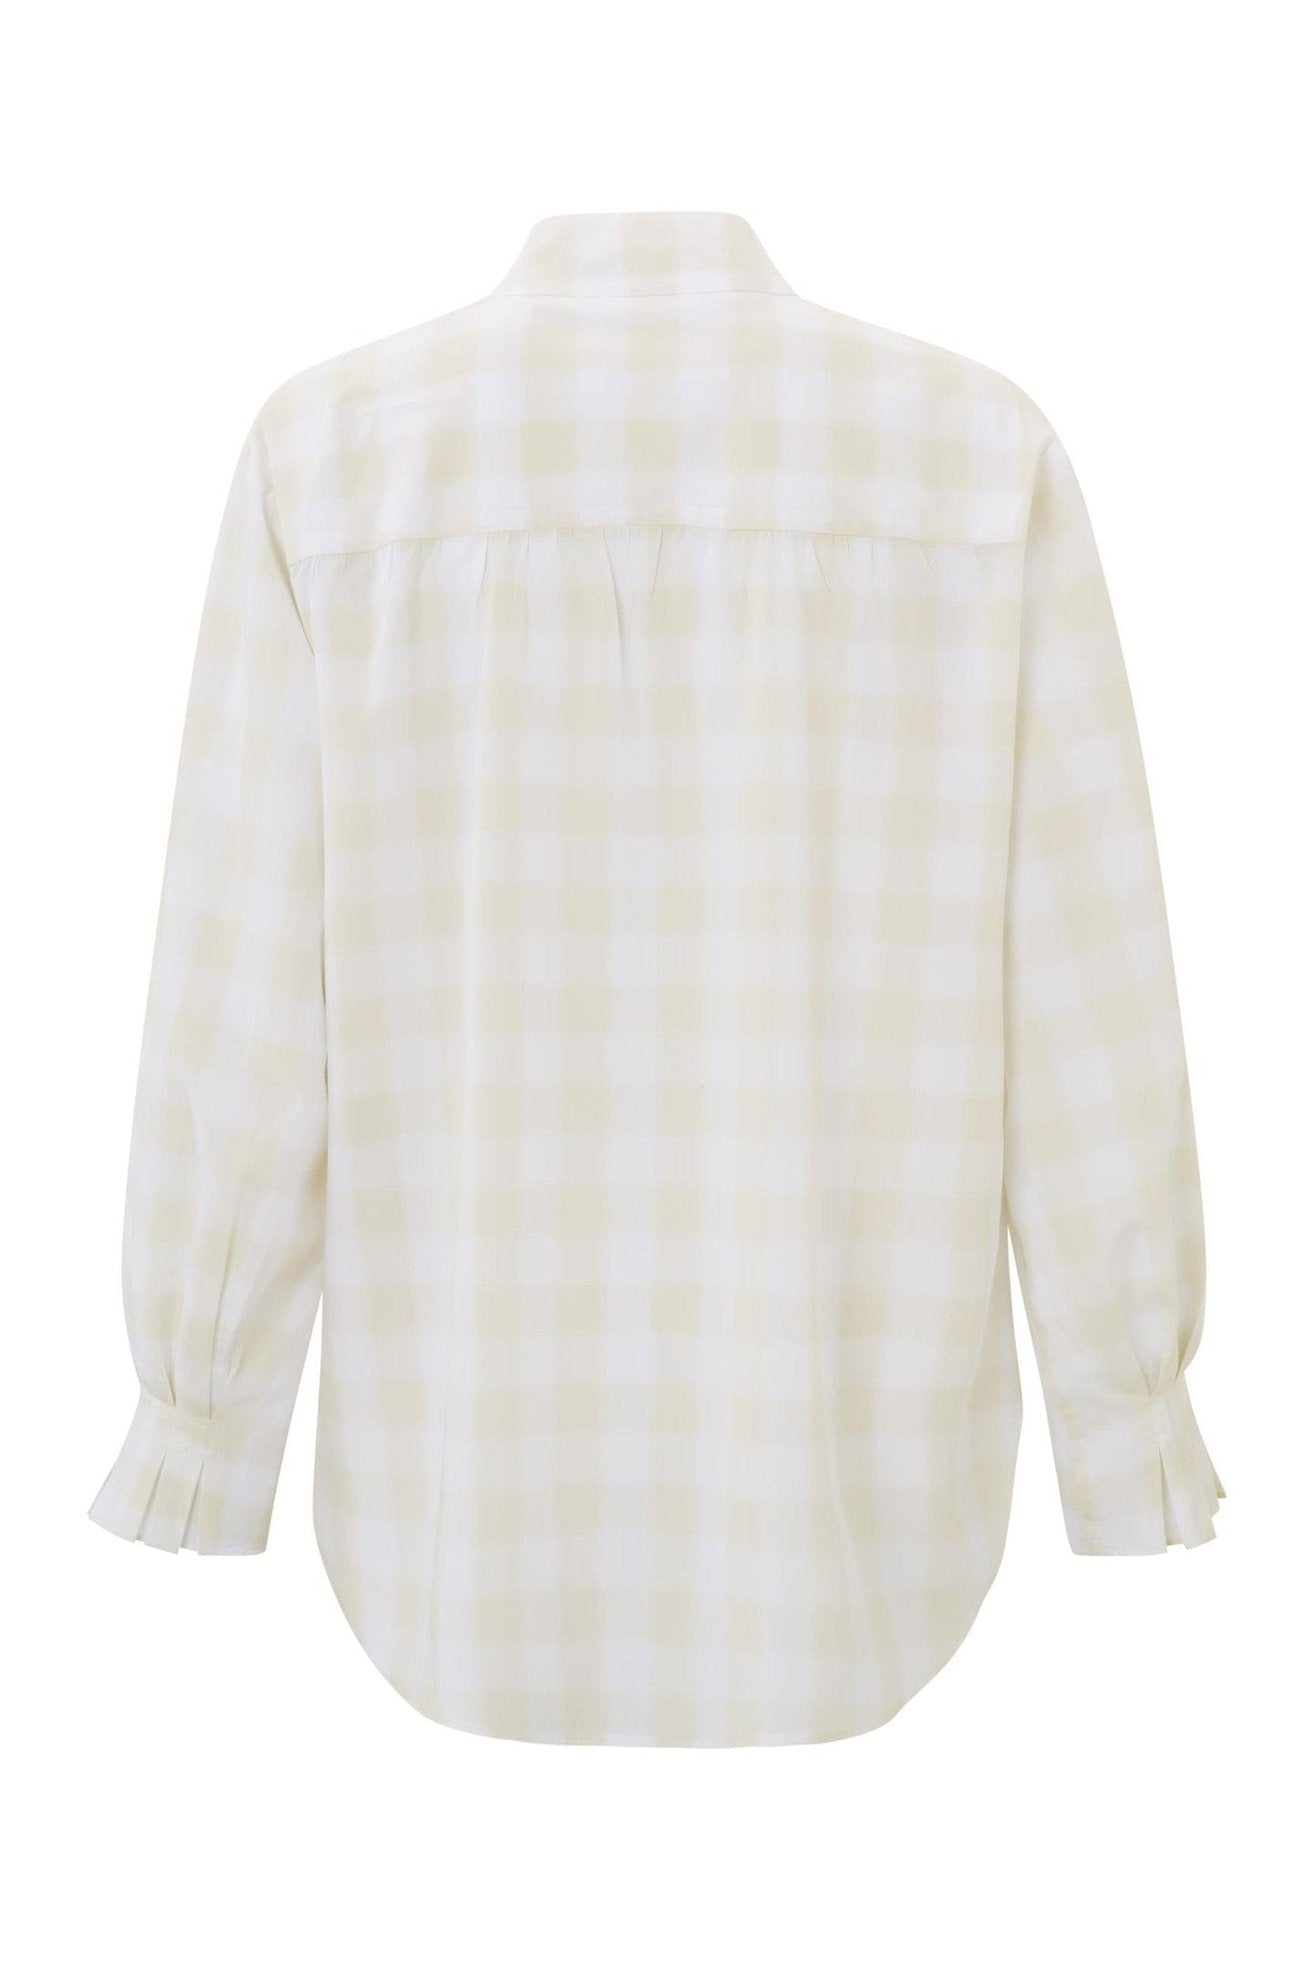 Checked Blouse